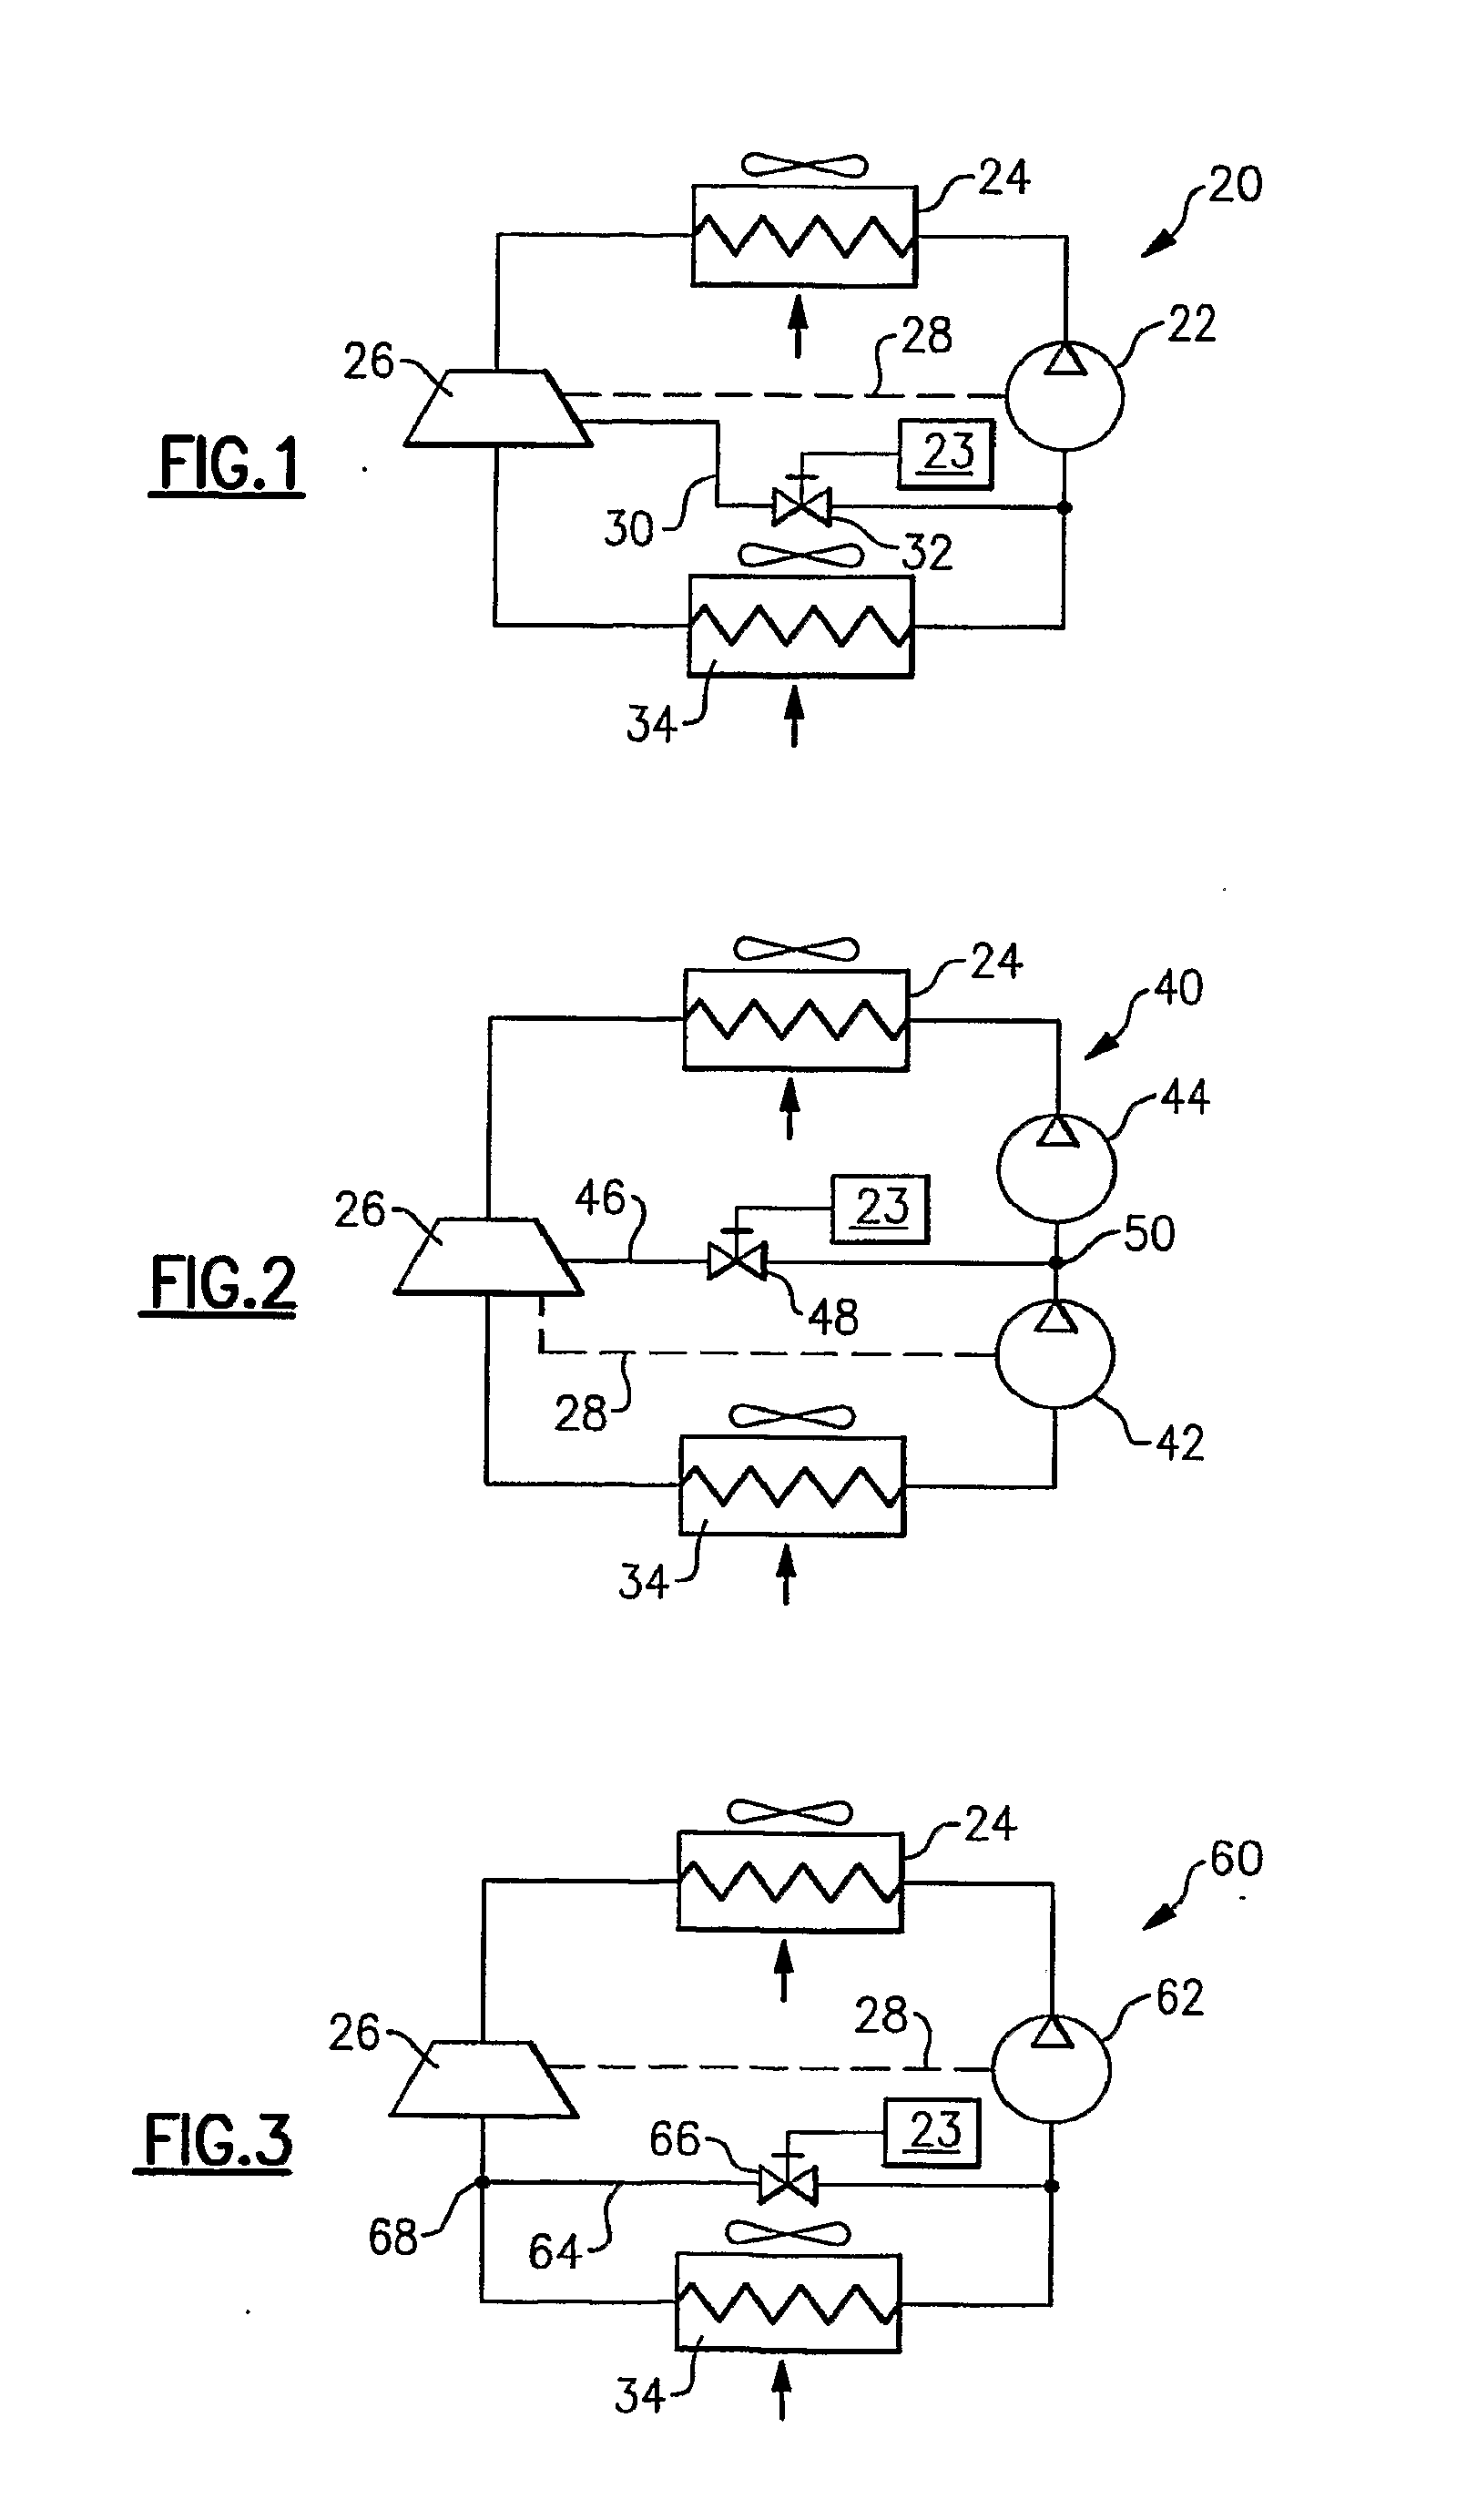 Injection of refrigerant in system with expander